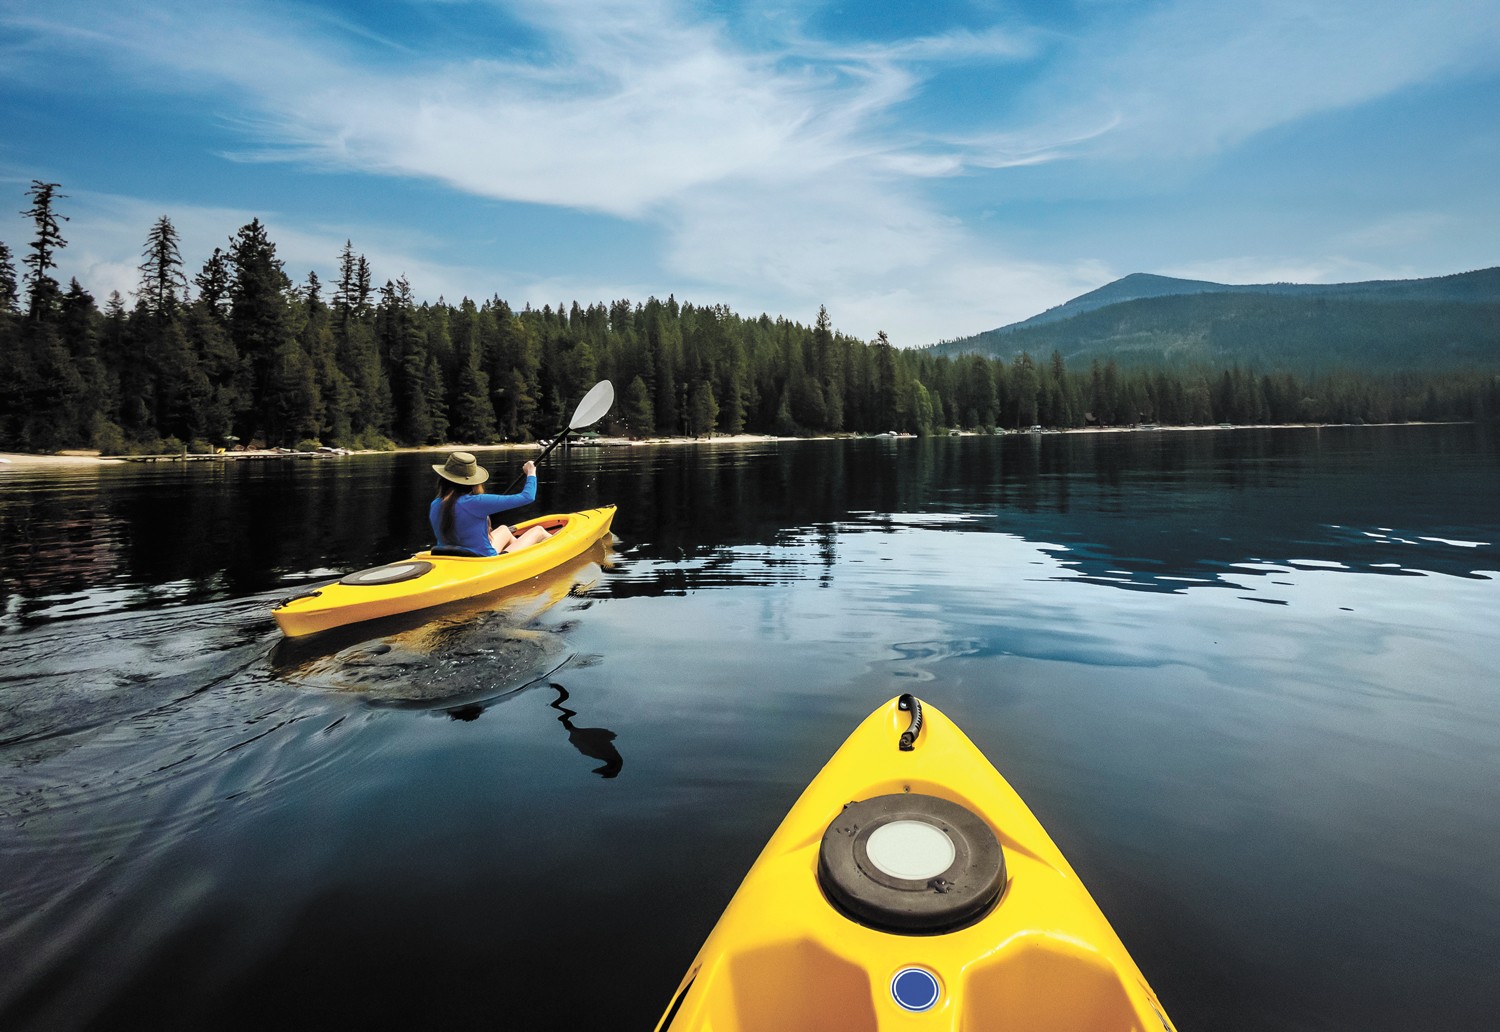 When is a workout simply sublime? When it's summertime and you're paddling around our region's beautiful lakes and waterways